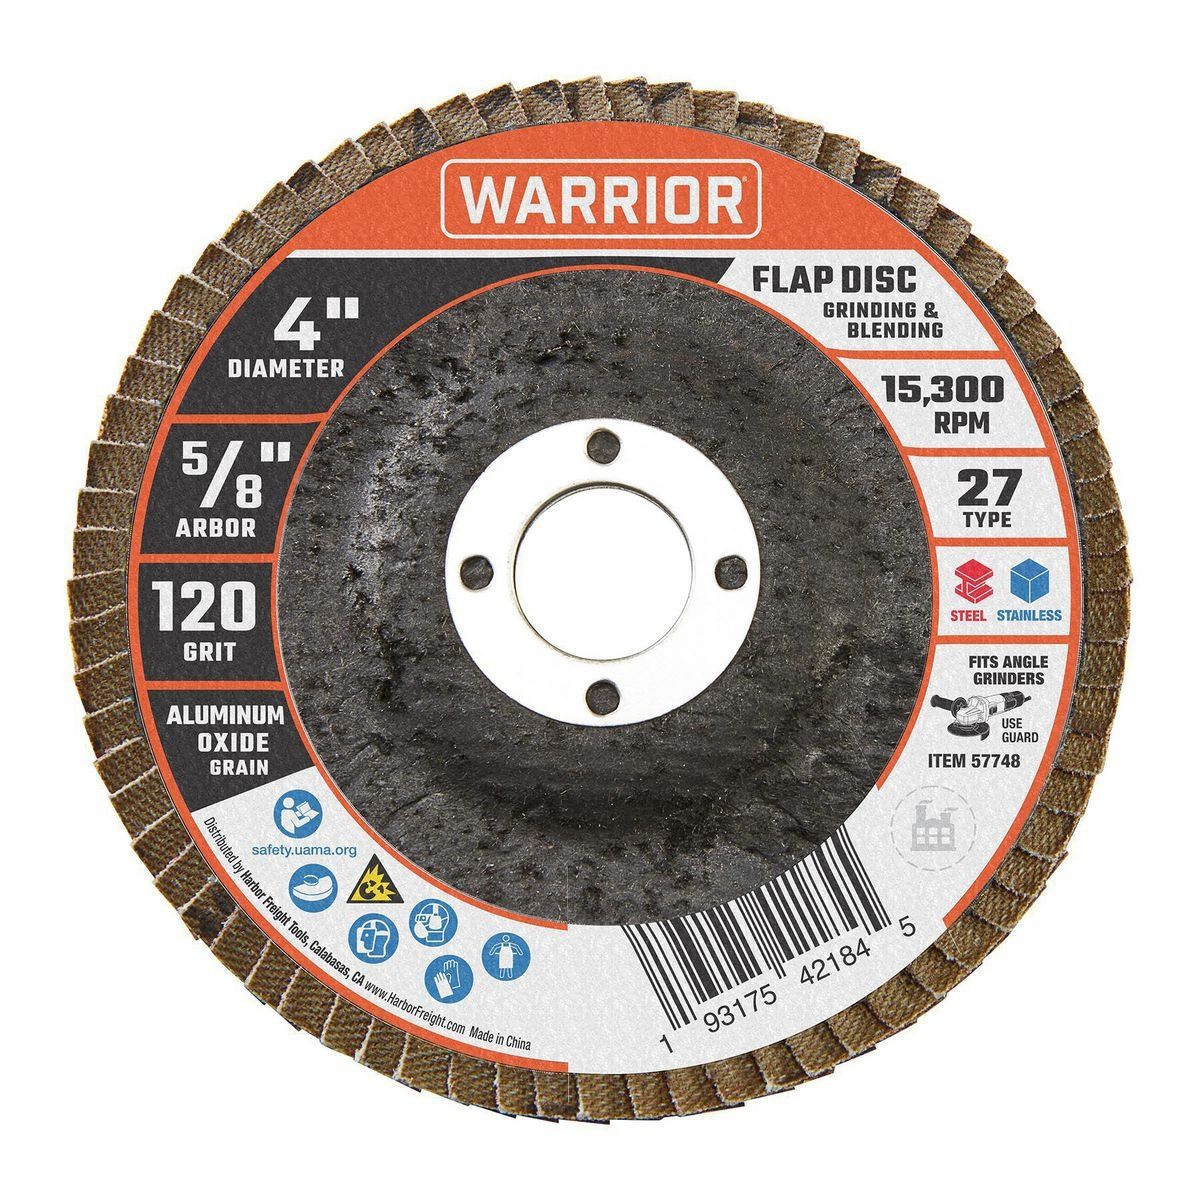 WARRIOR 4 in. x 5/8 in. 120-Grit Type 27 Flap Disc with Fiberglass Backing and Aluminum oxide Grain